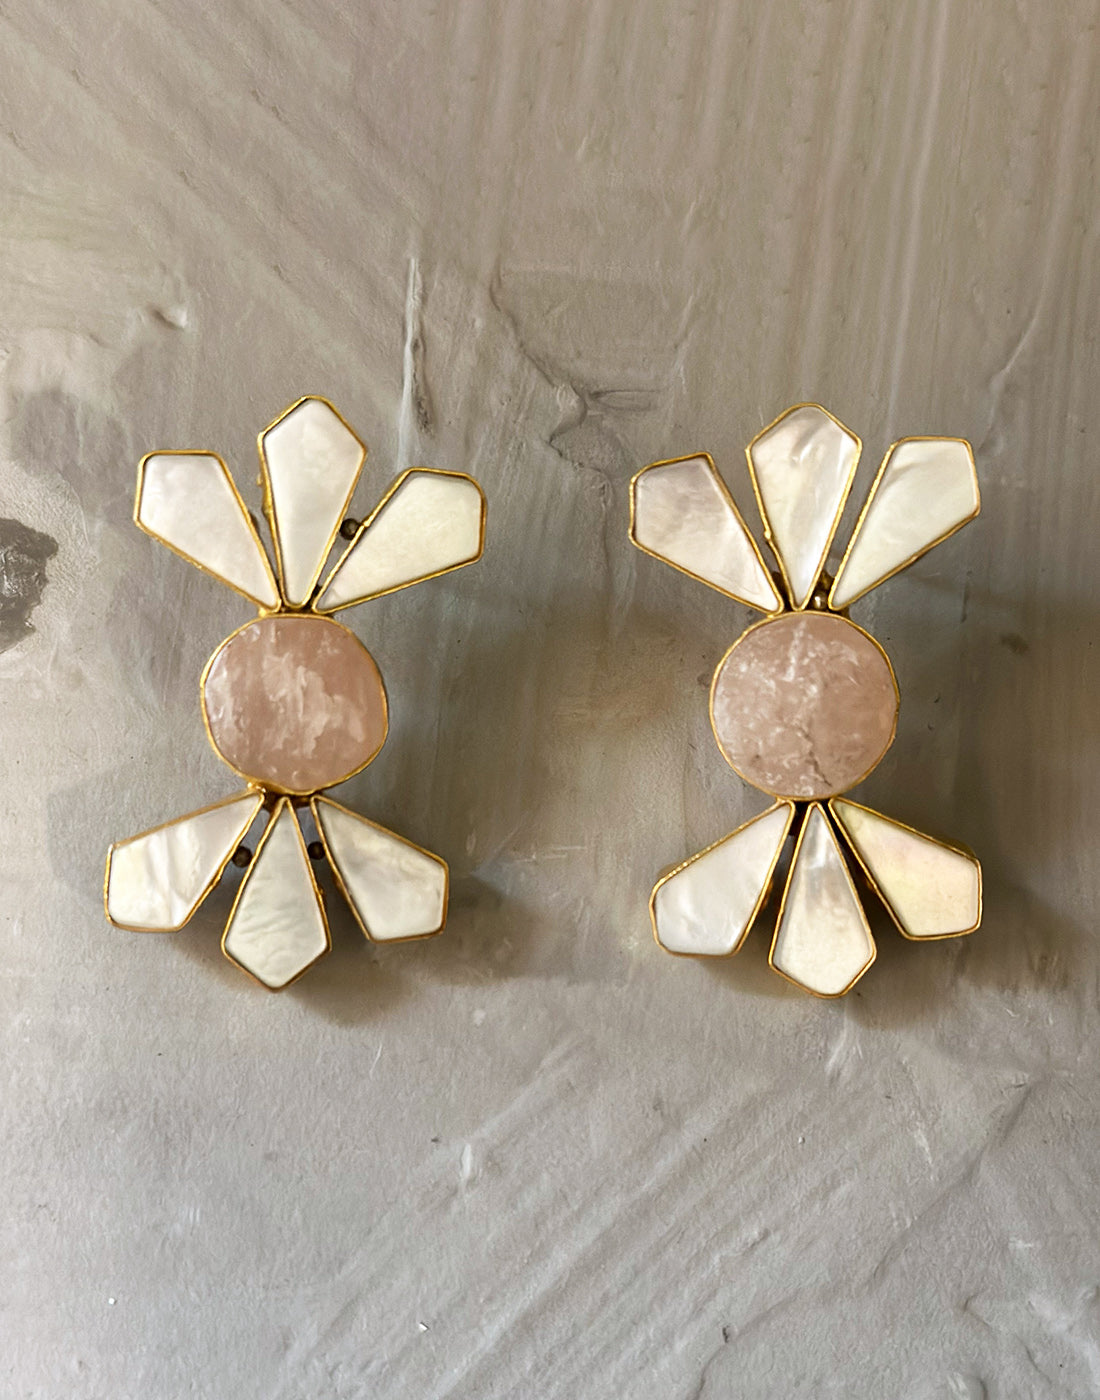 Candy Earrings (Rose Quartz) - Statement Earrings - Gold-Plated & Hypoallergenic Jewellery - Made in India - Dubai Jewellery - Dori